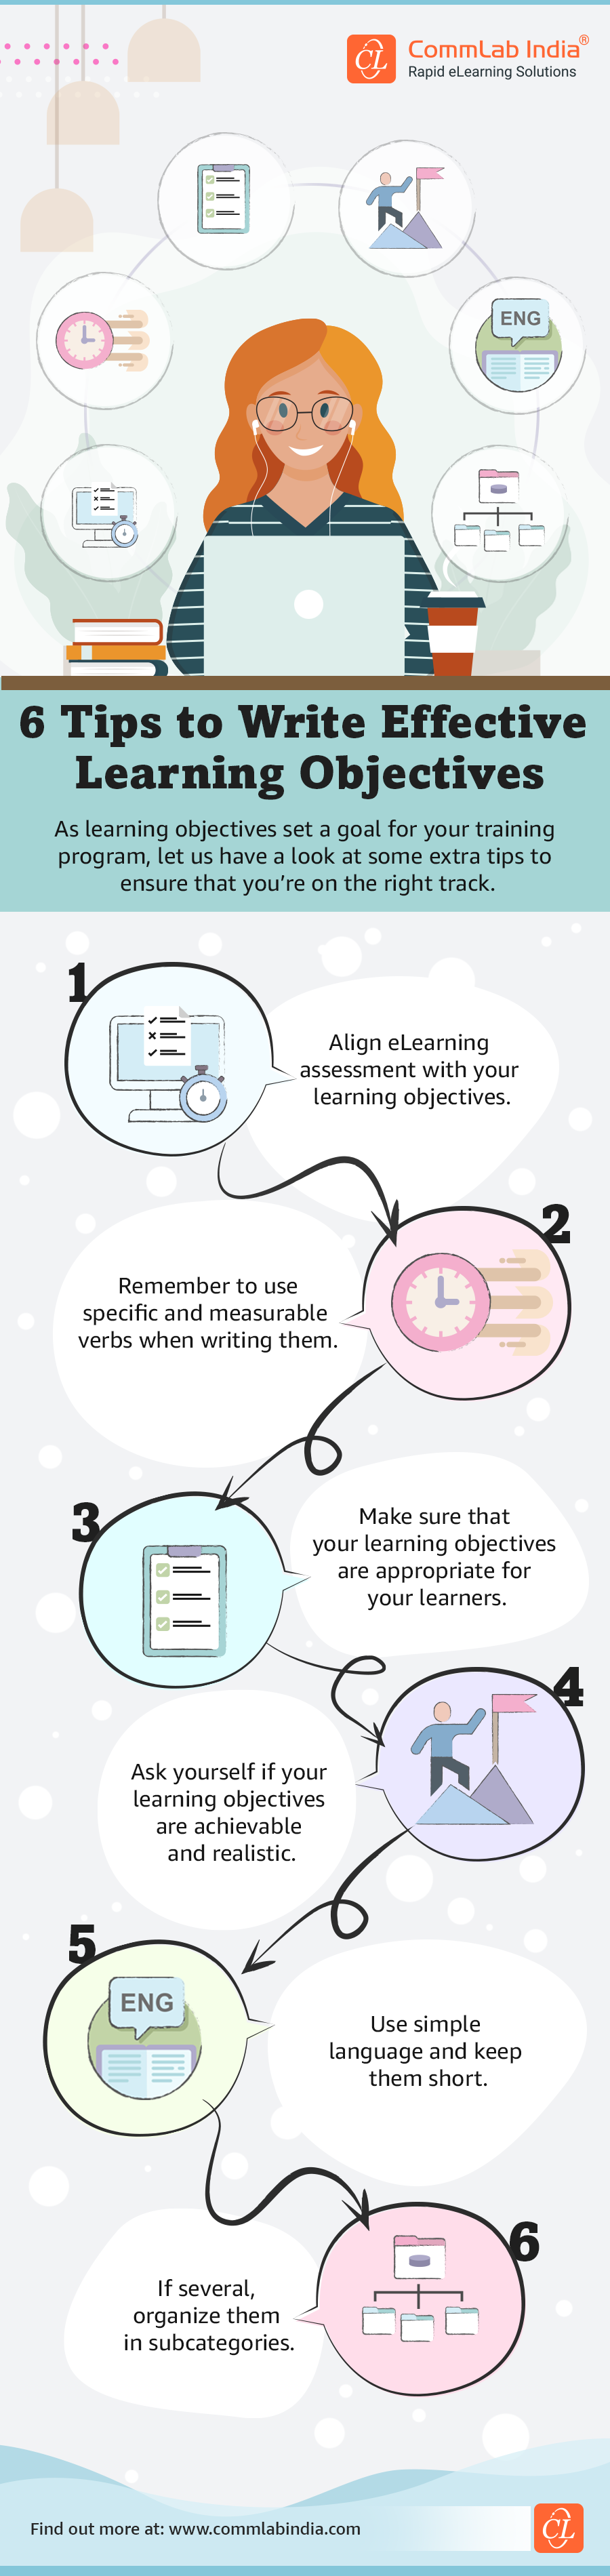 Amazing Tips to Write Effective eLearning Assessments